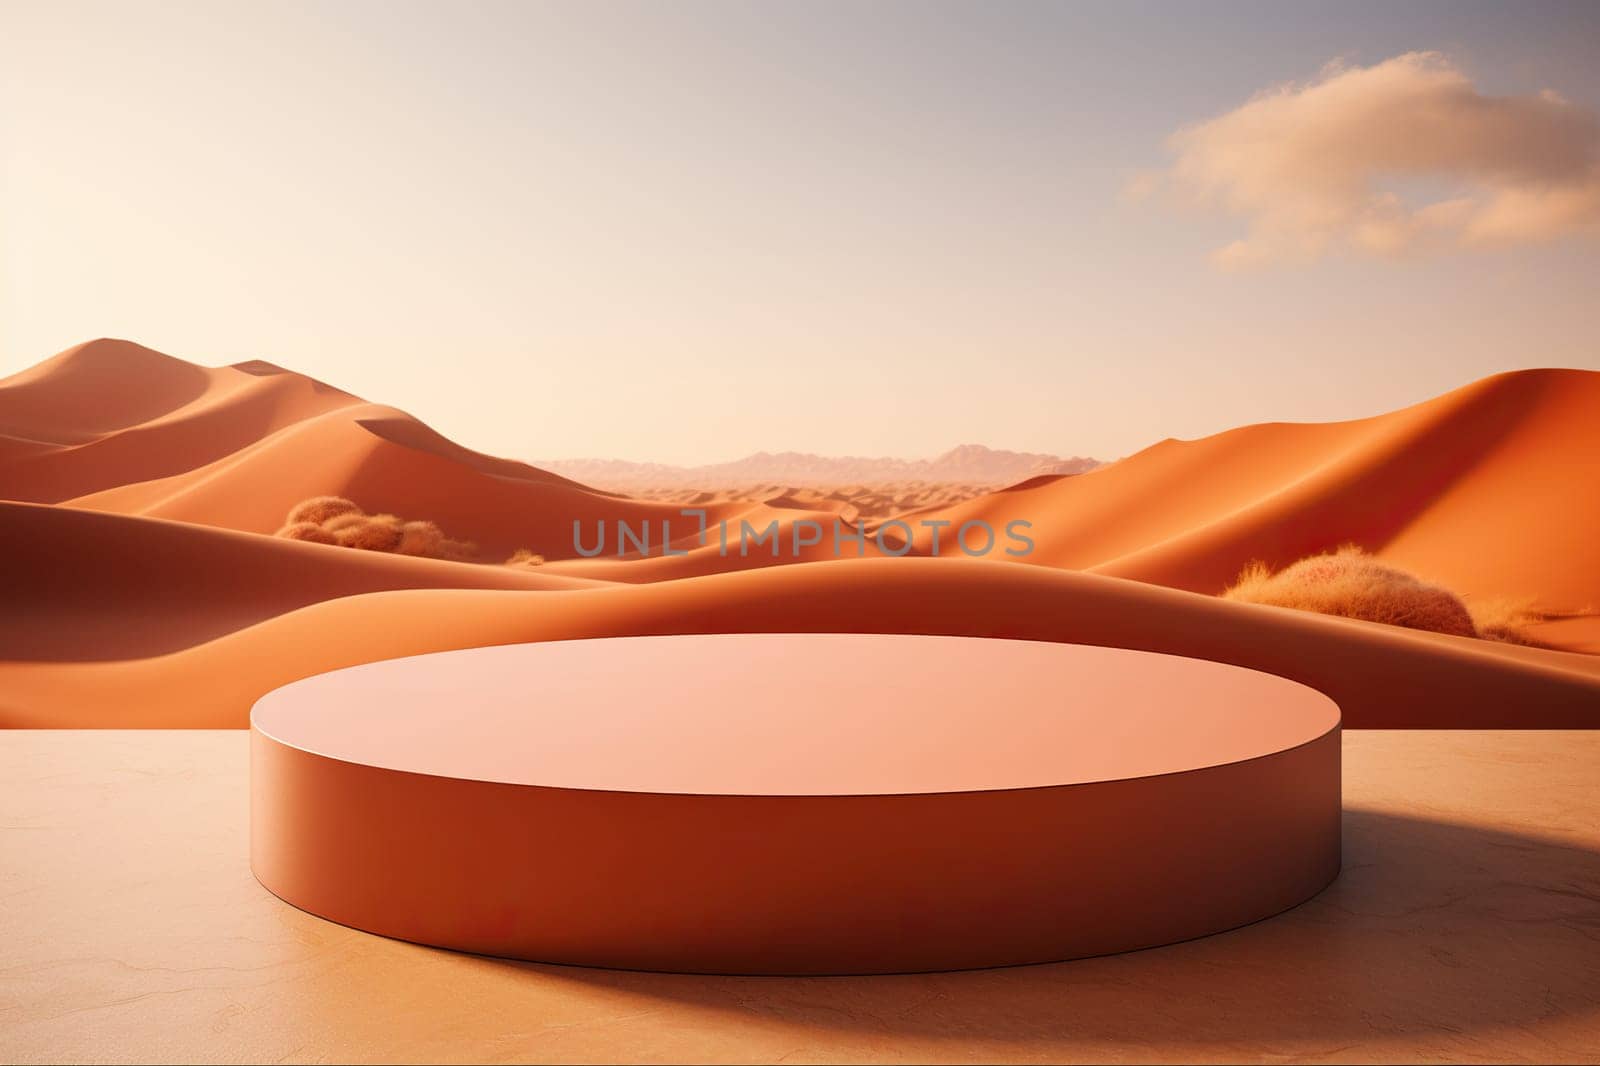 3D podium for demonstrating products against a desert background.